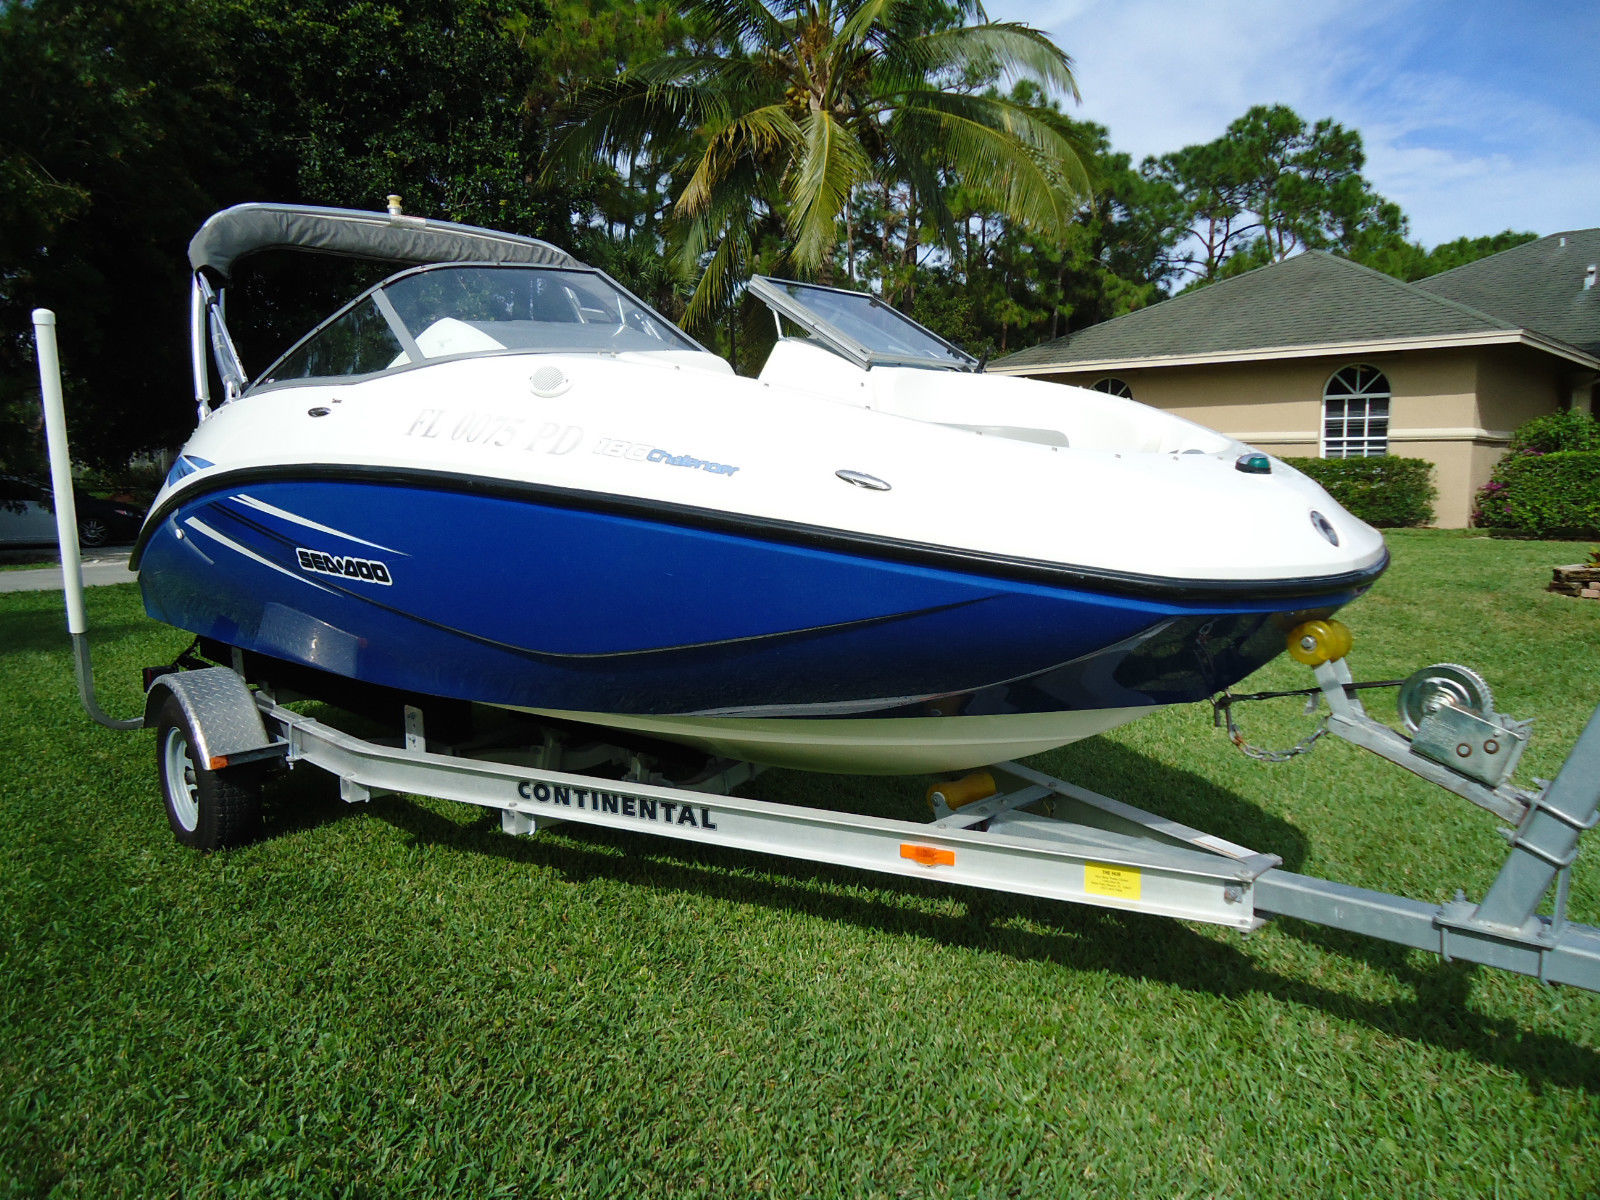 Sea Doo Challenger 2010 for sale for $560 - Boats-from-USA.com